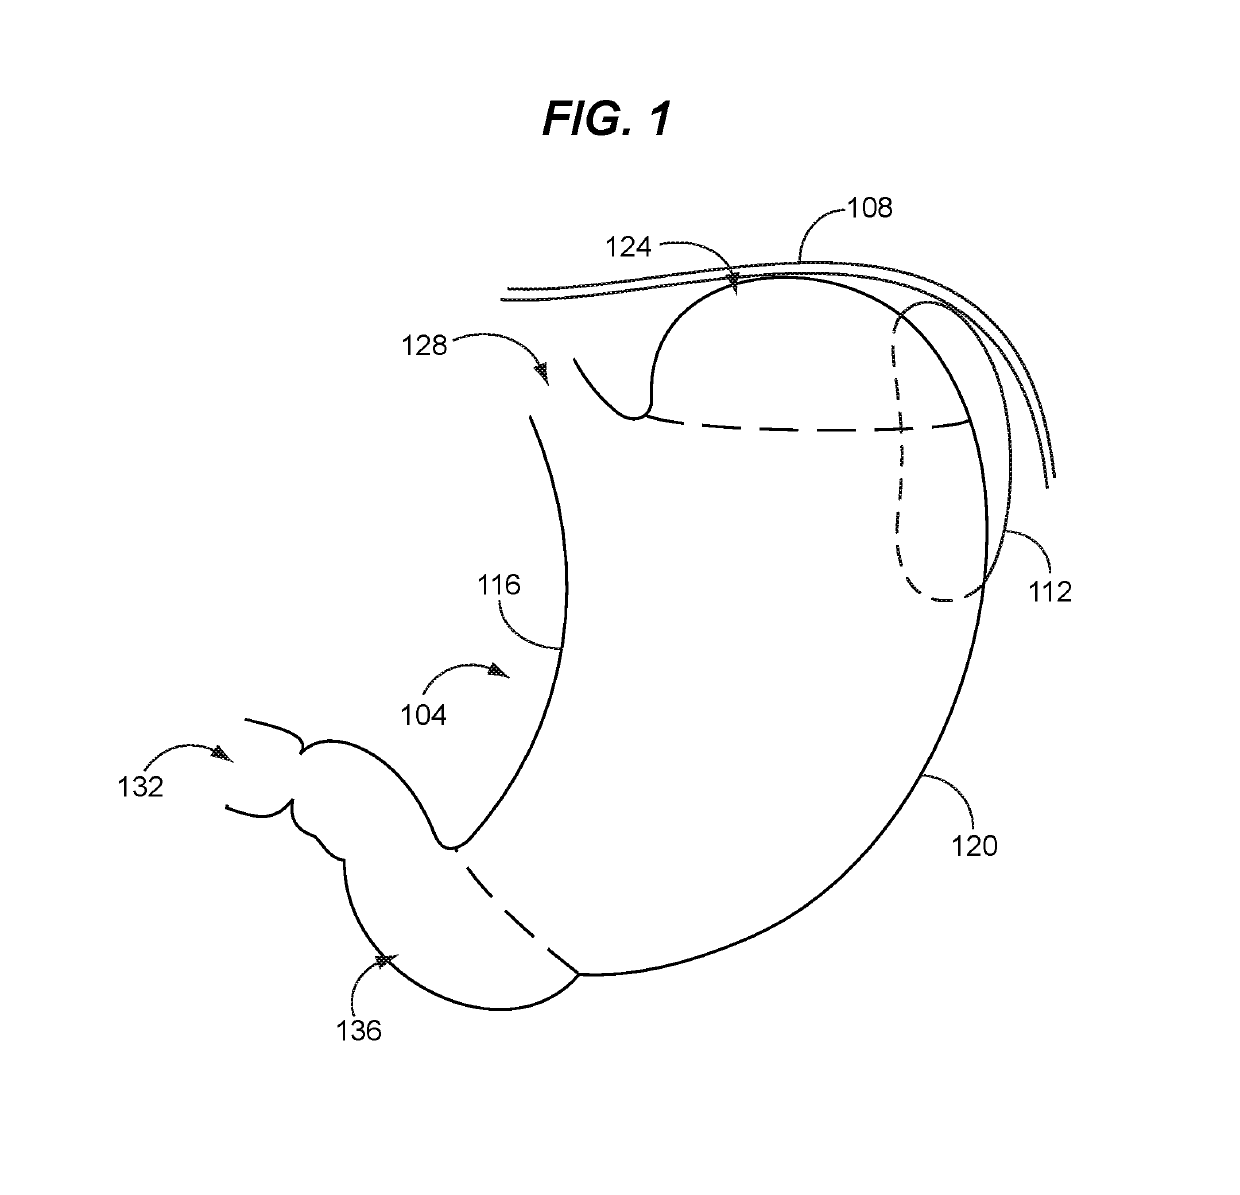 Safe sleeve gastrectomy and intestinal switch